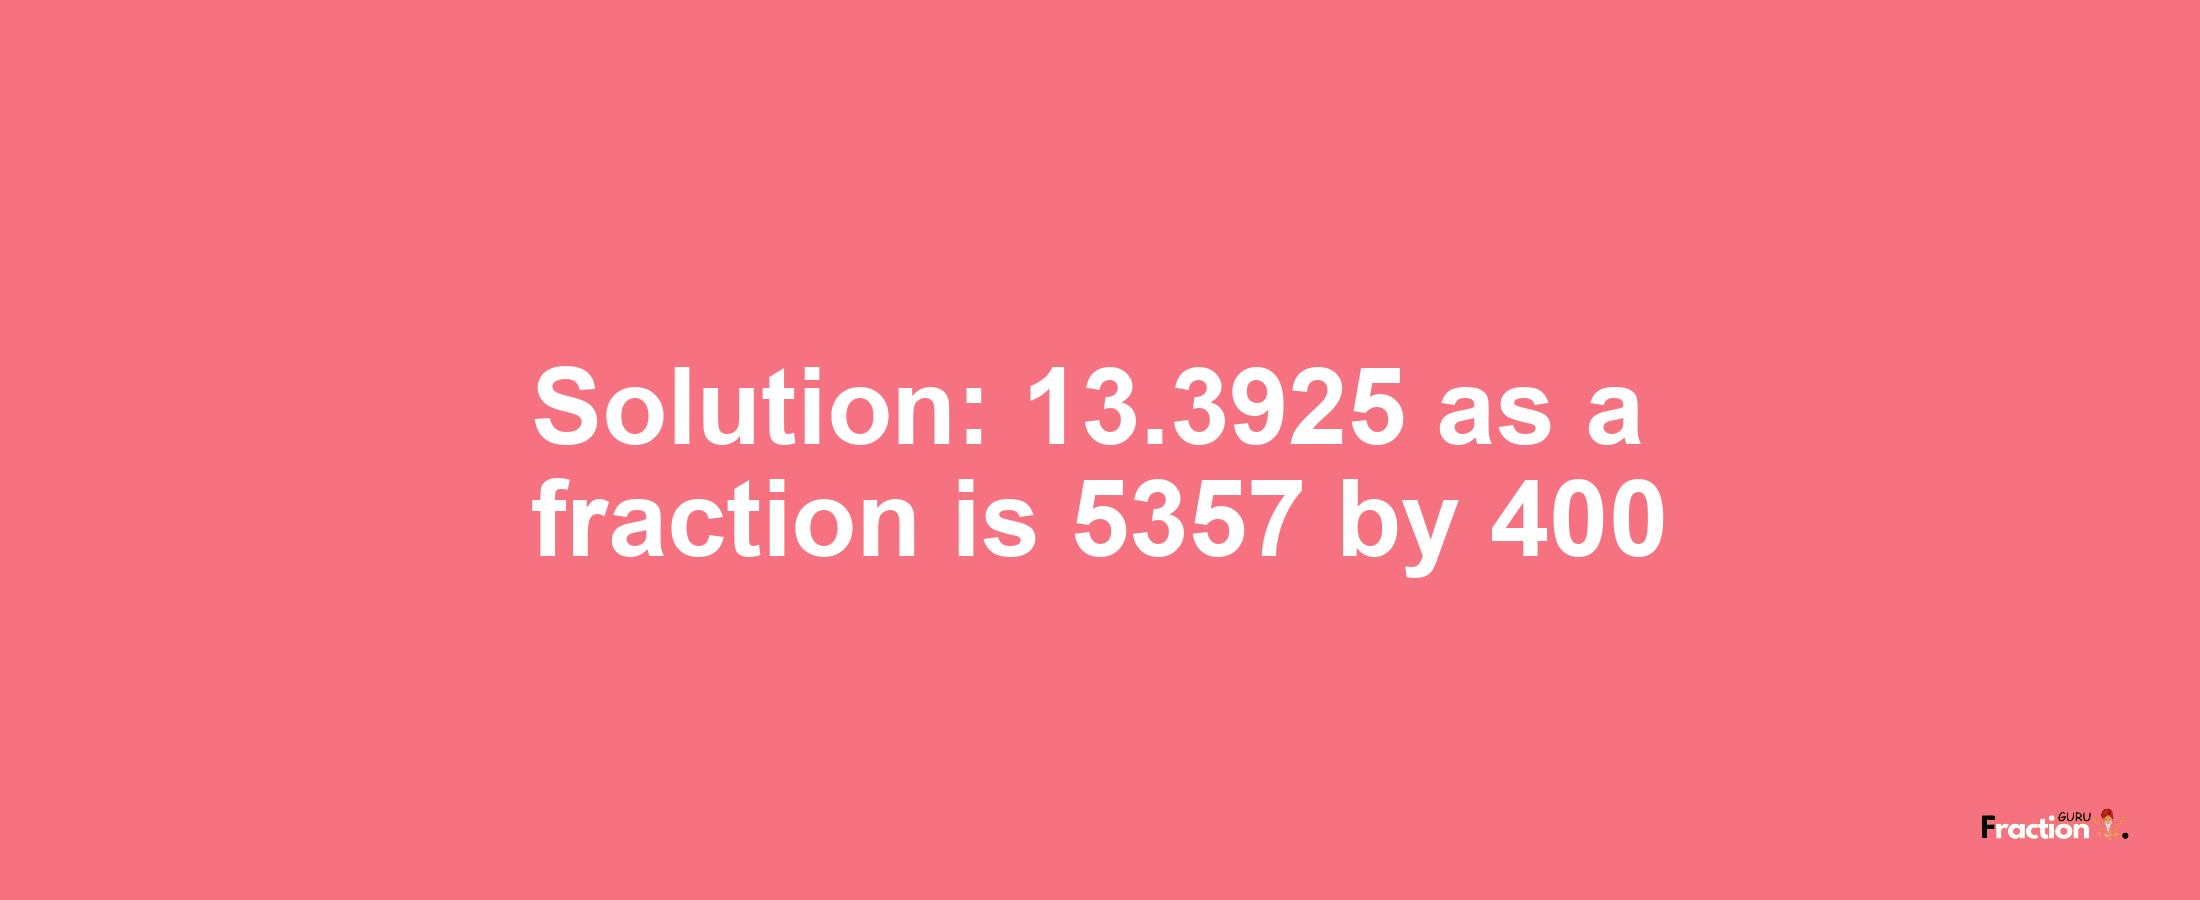 Solution:13.3925 as a fraction is 5357/400